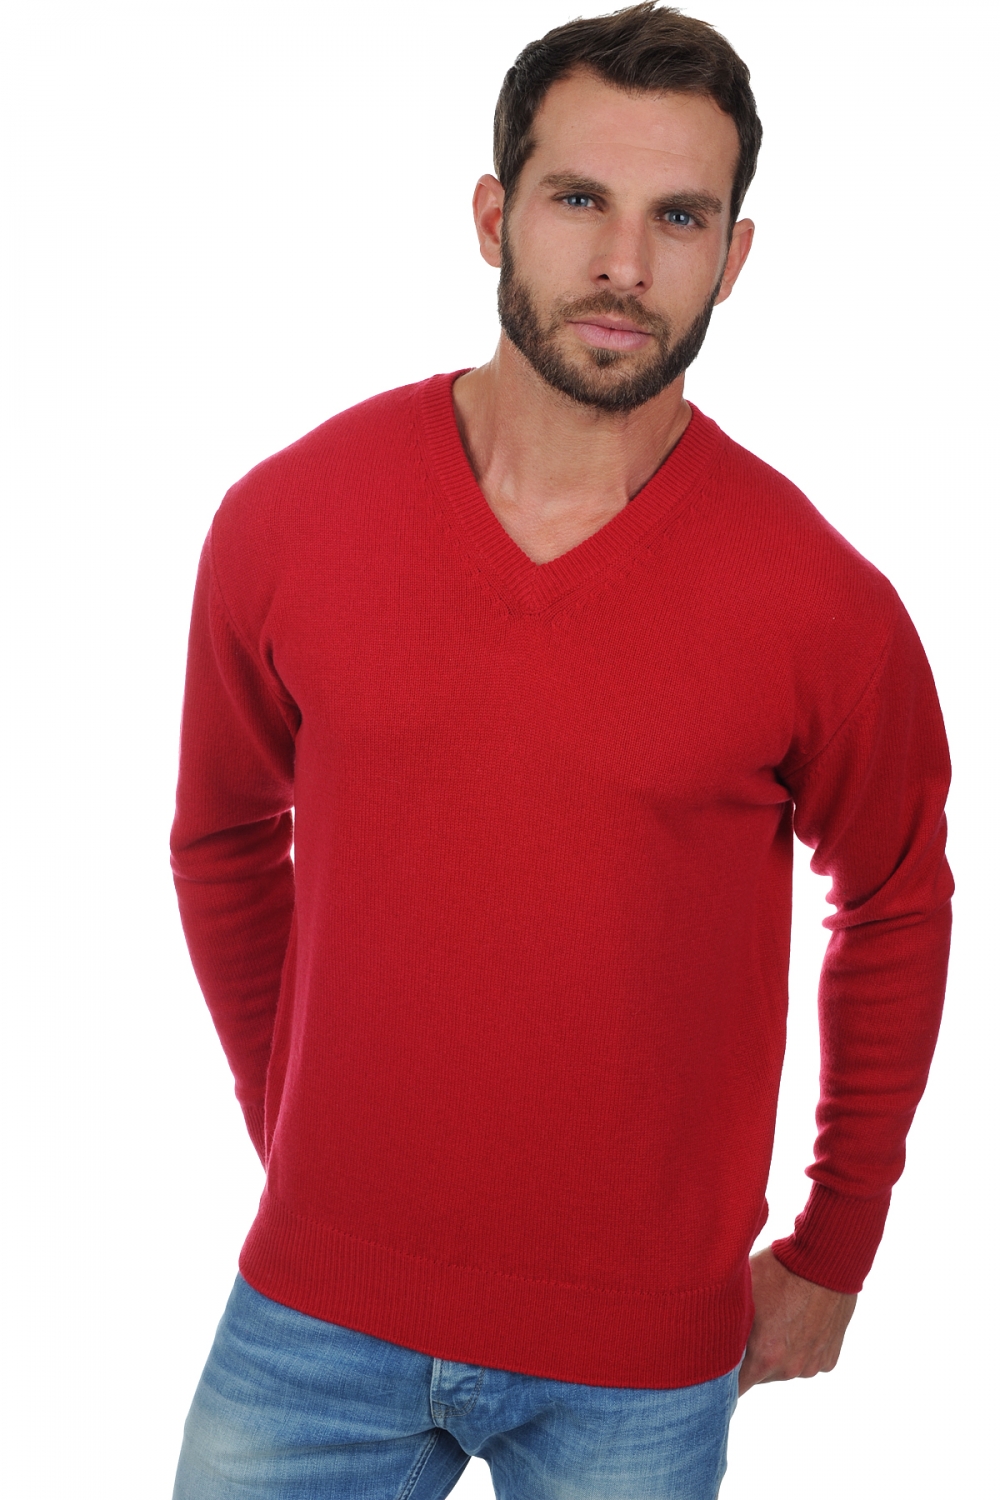 Cashmere men hippolyte 4f blood red s